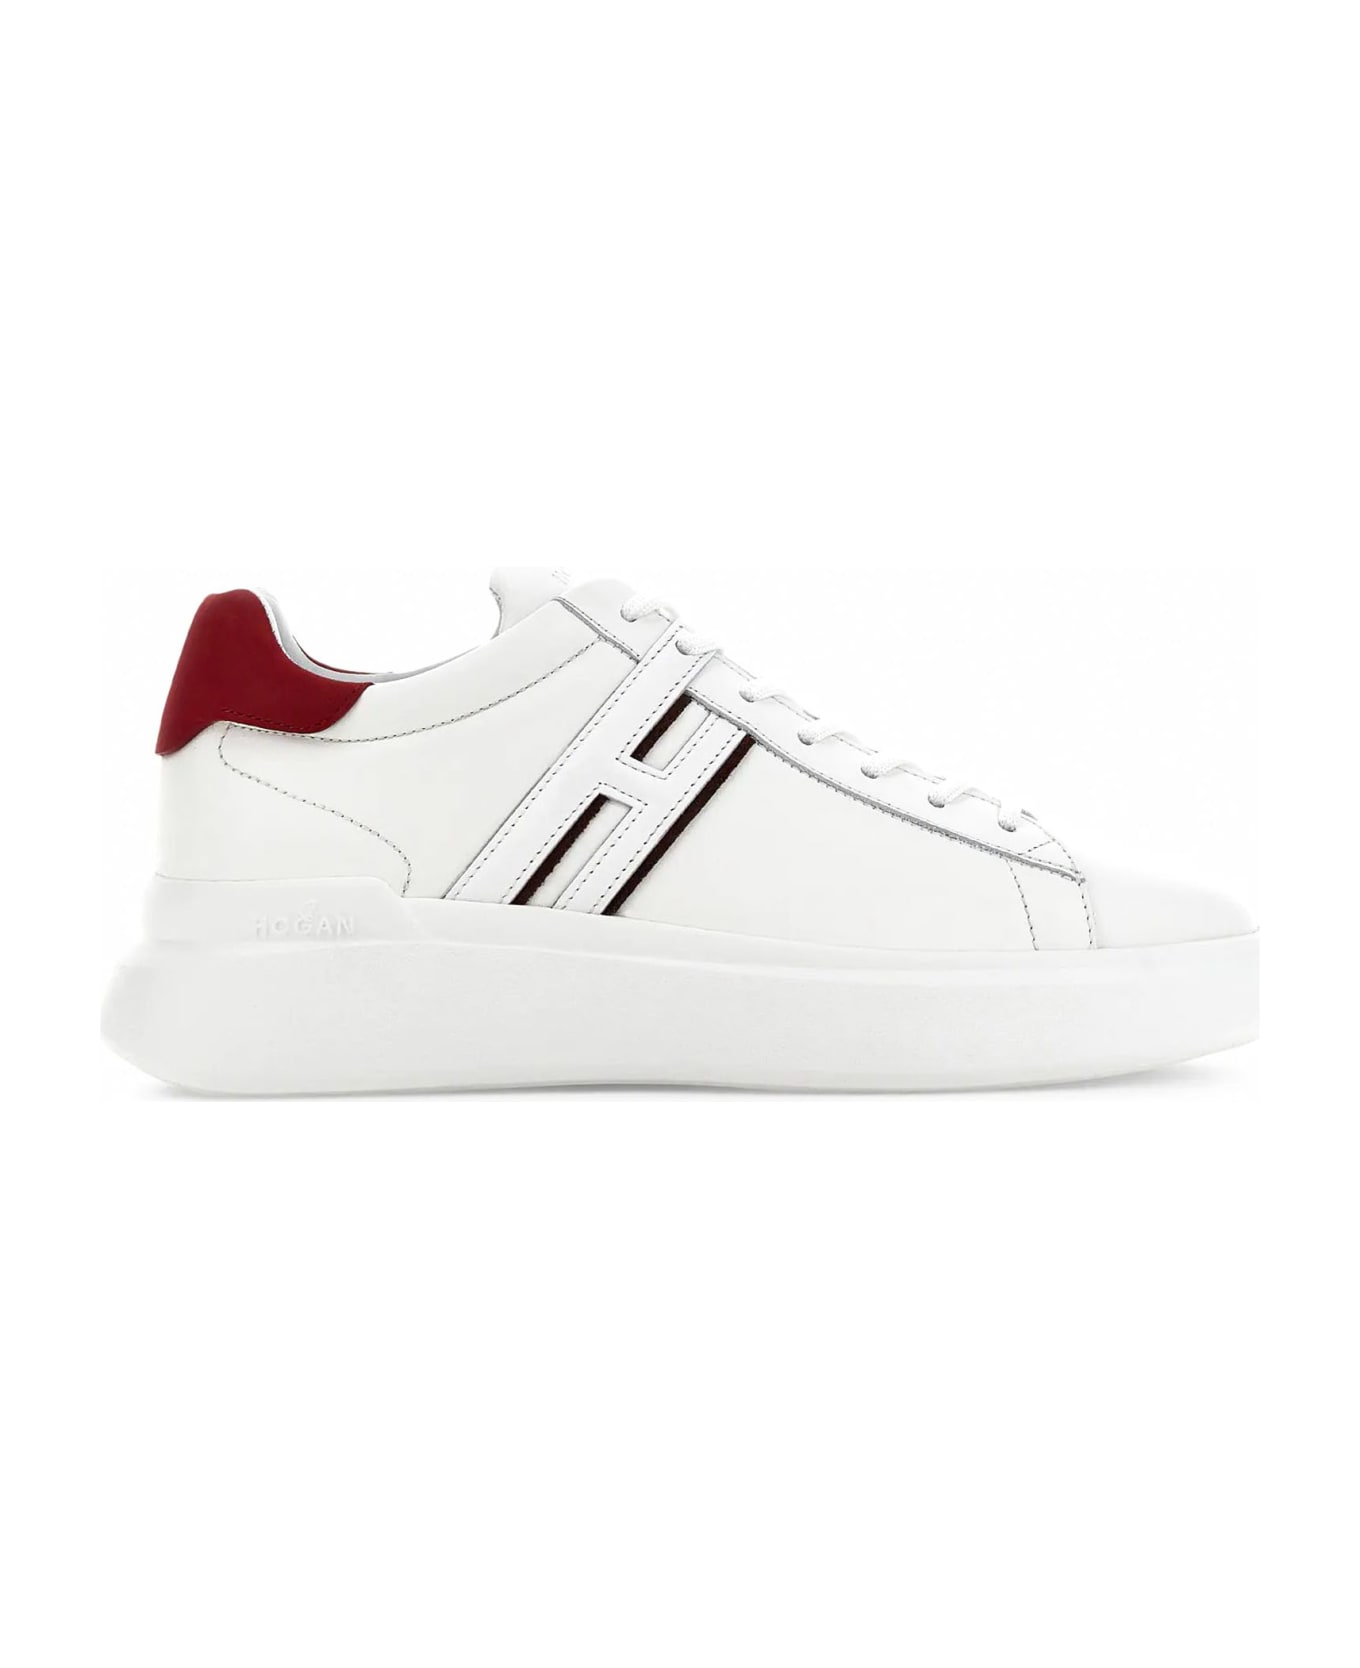 Hogan H580 Sneakers - Bianco/rosso